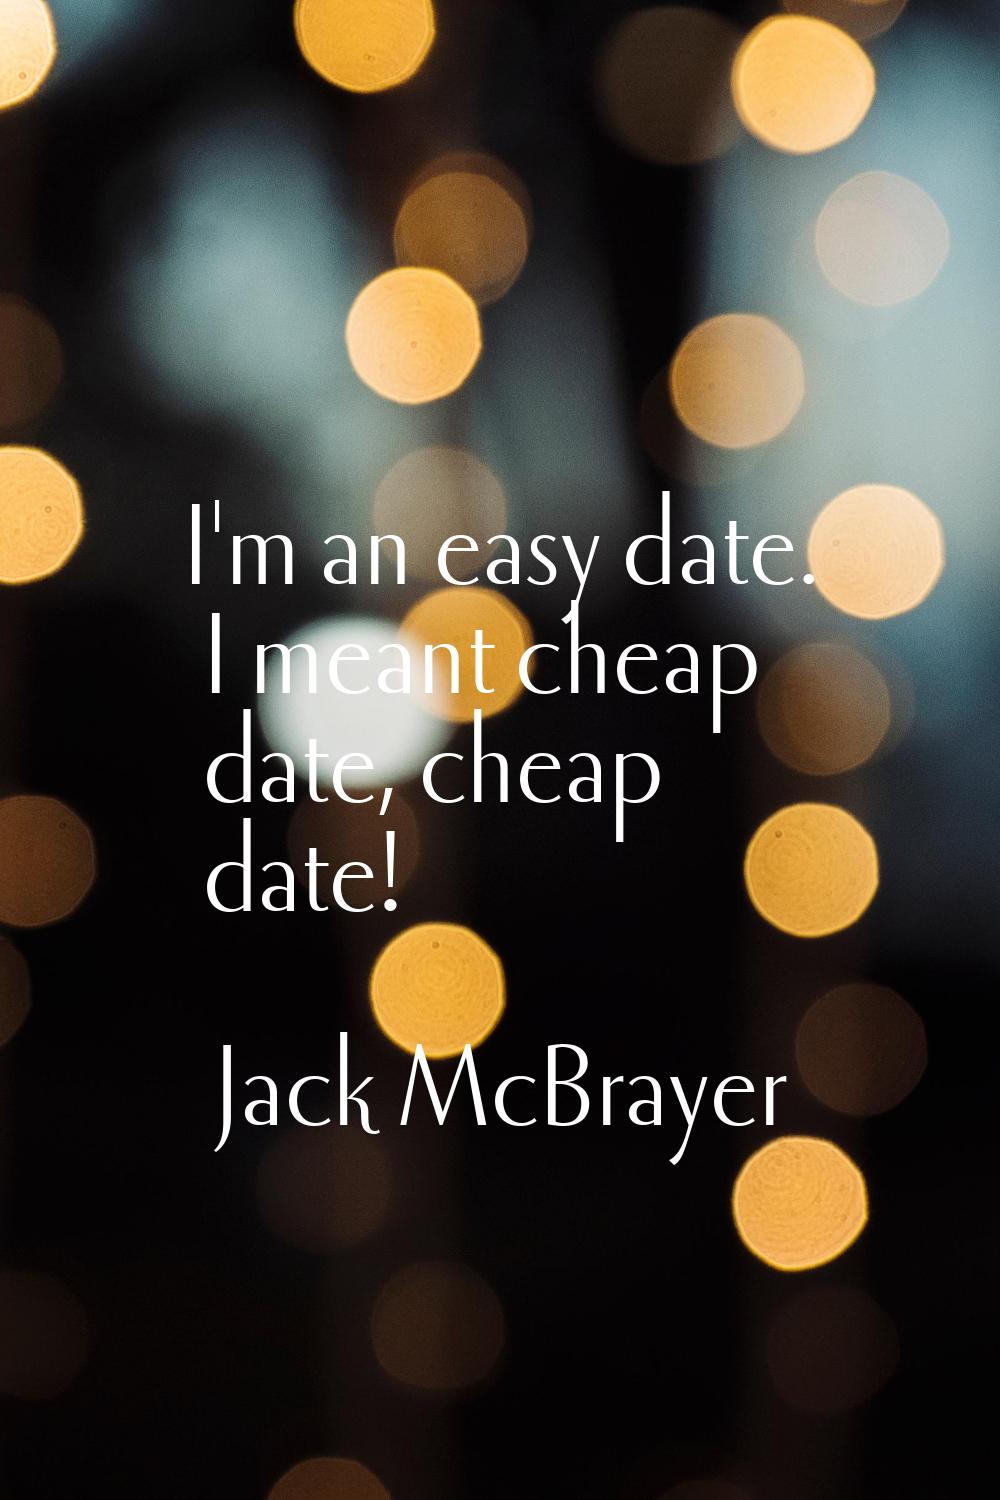 I'm an easy date. I meant cheap date, cheap date!